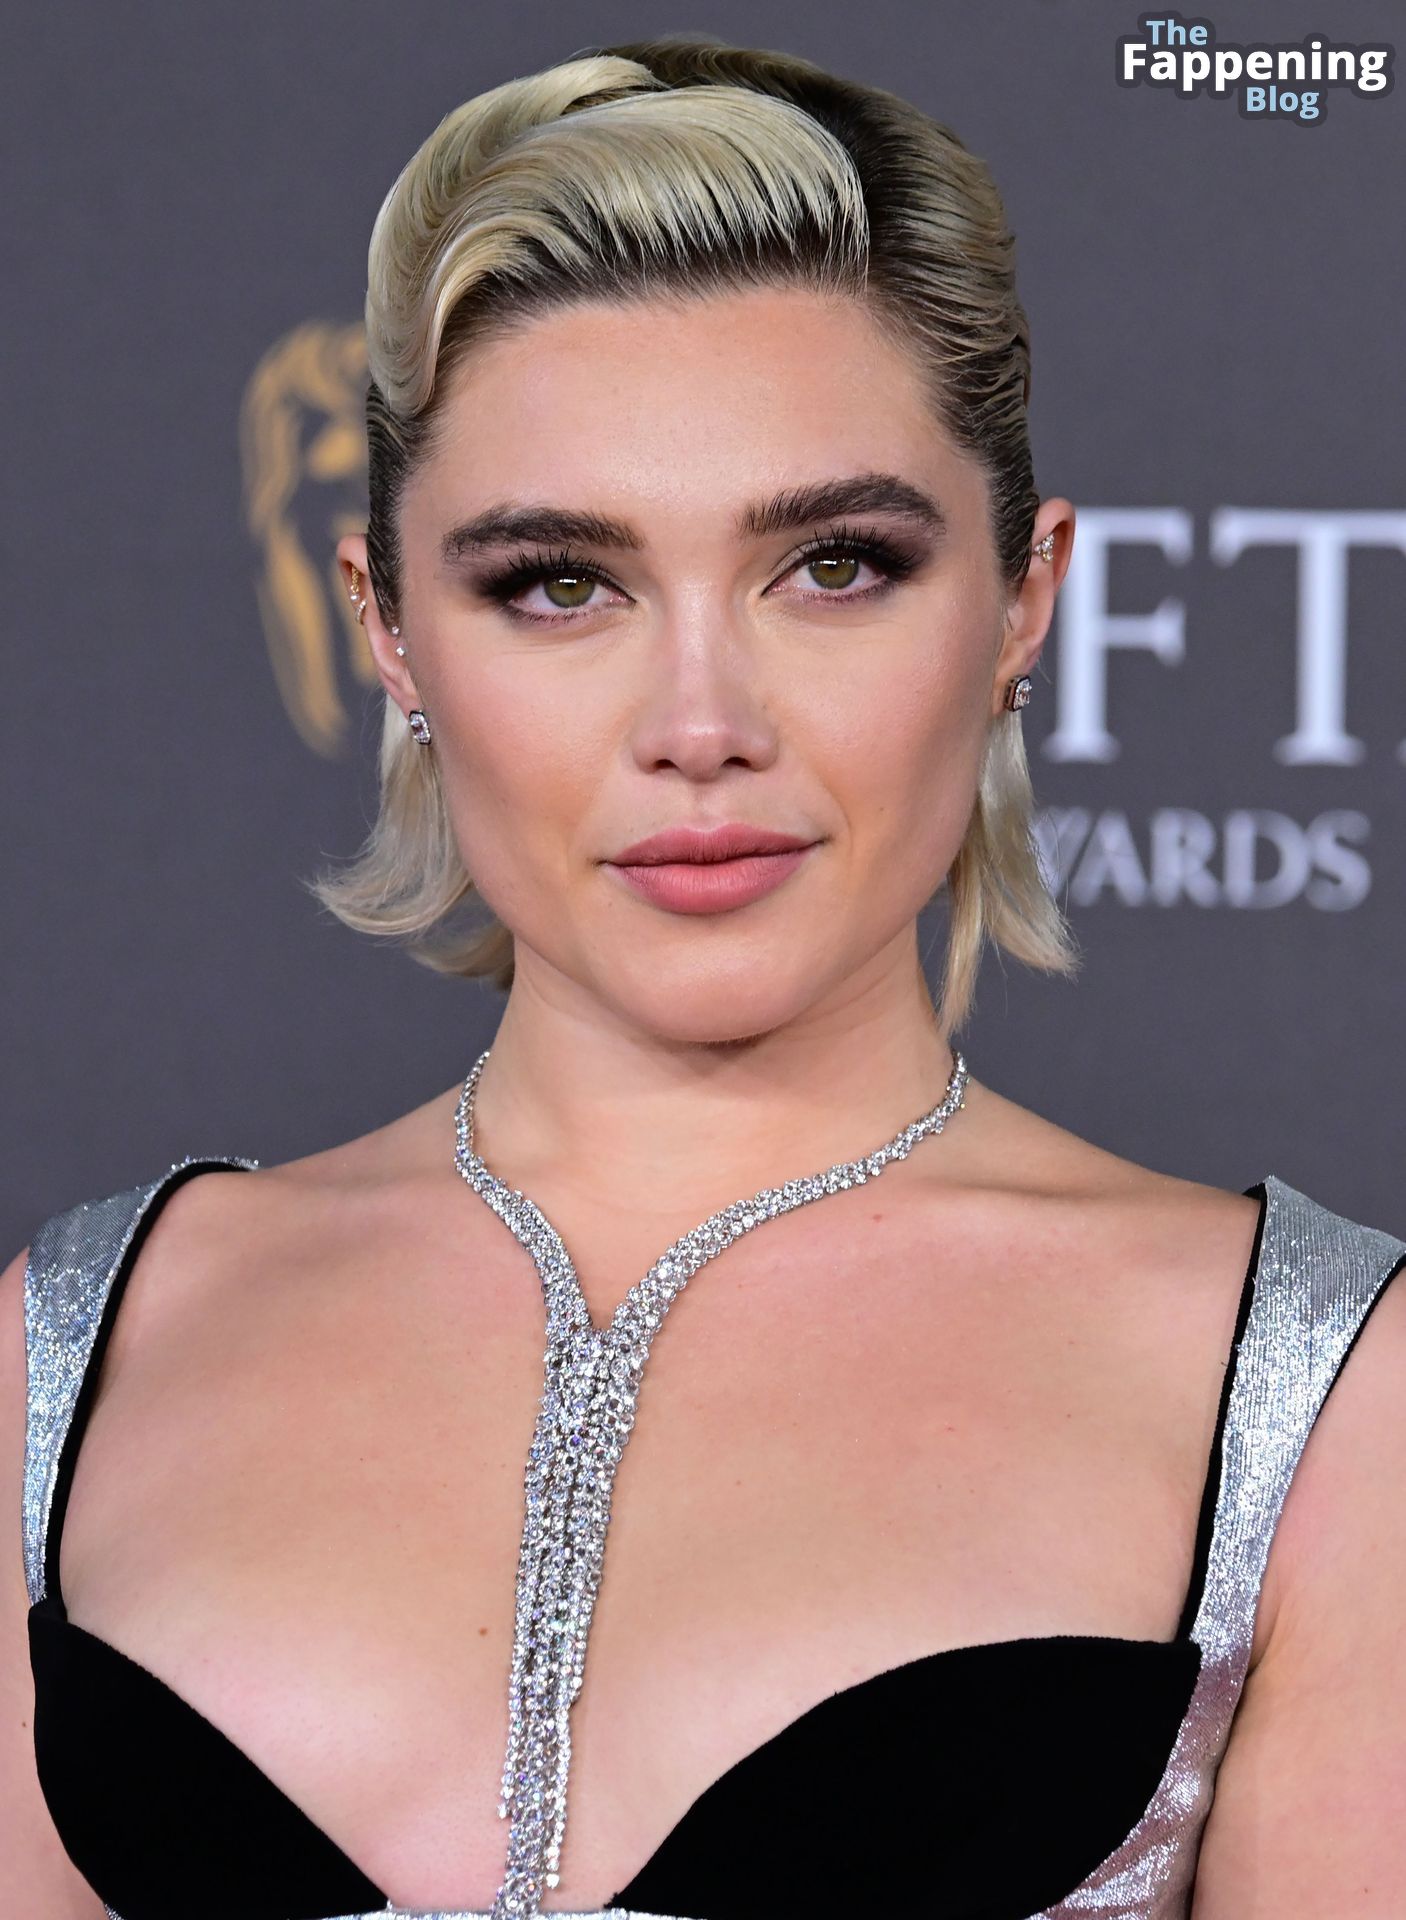 Florence-Pugh-Sexy-32-The-Fappening-Blog-2.jpg